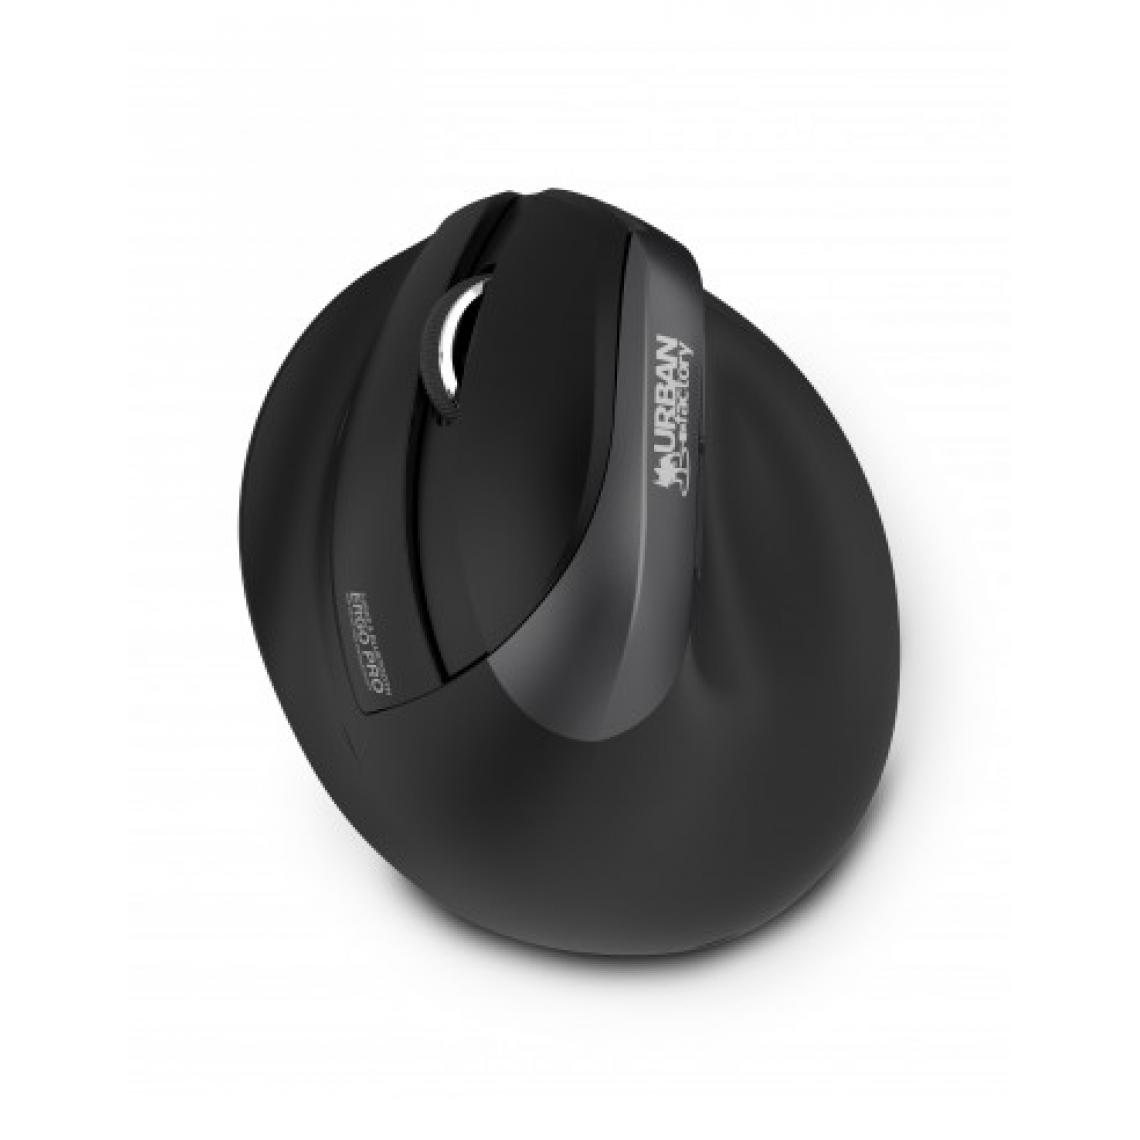 Urban Factory - Ergo Mouse Bluetooth Ergo Mouse Bluetooth 2.4Ghz and wired USB 1000mAh rechargeable battery in USB-C using the included cable - Souris